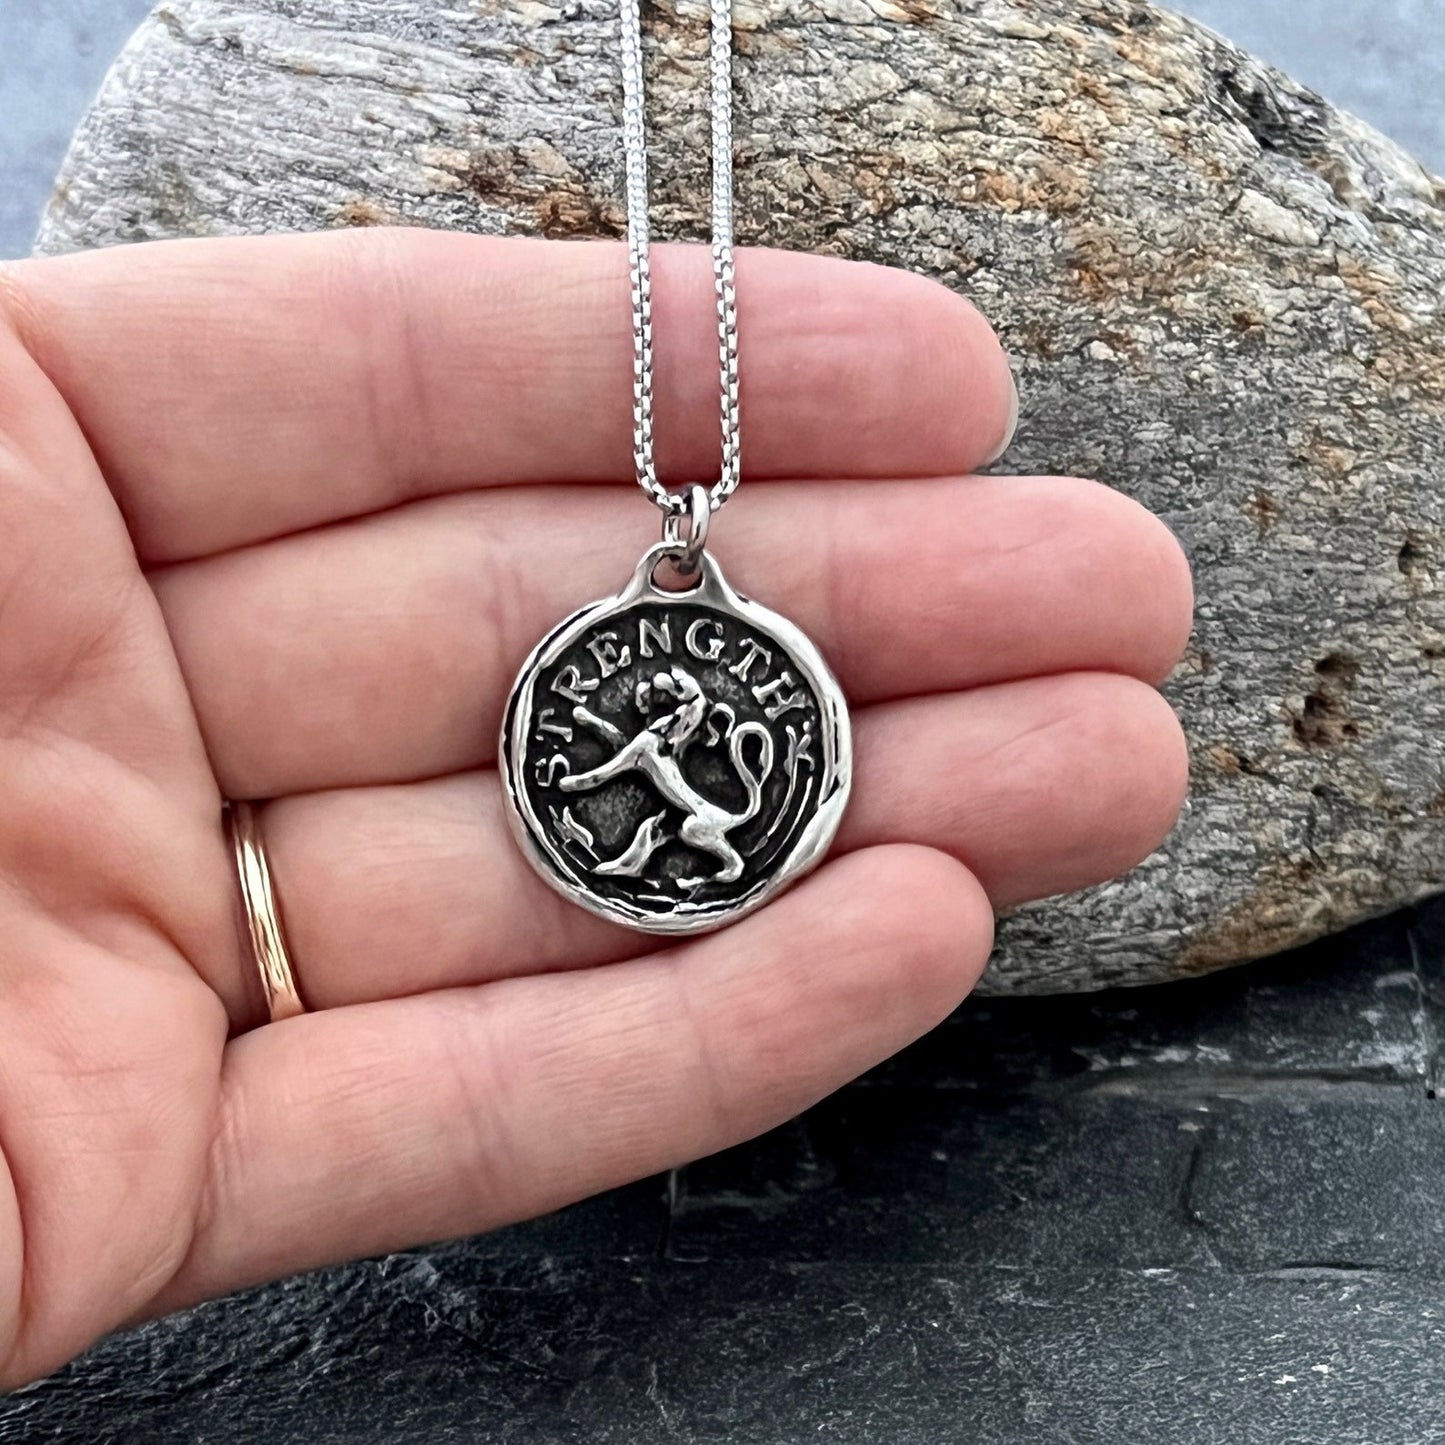 Men's Lion, Strength Wax Seal Necklace, Antiqued Pewter and Stainless Steel Unisex Jewelry, Chain length 20 or 24 inches ST-042